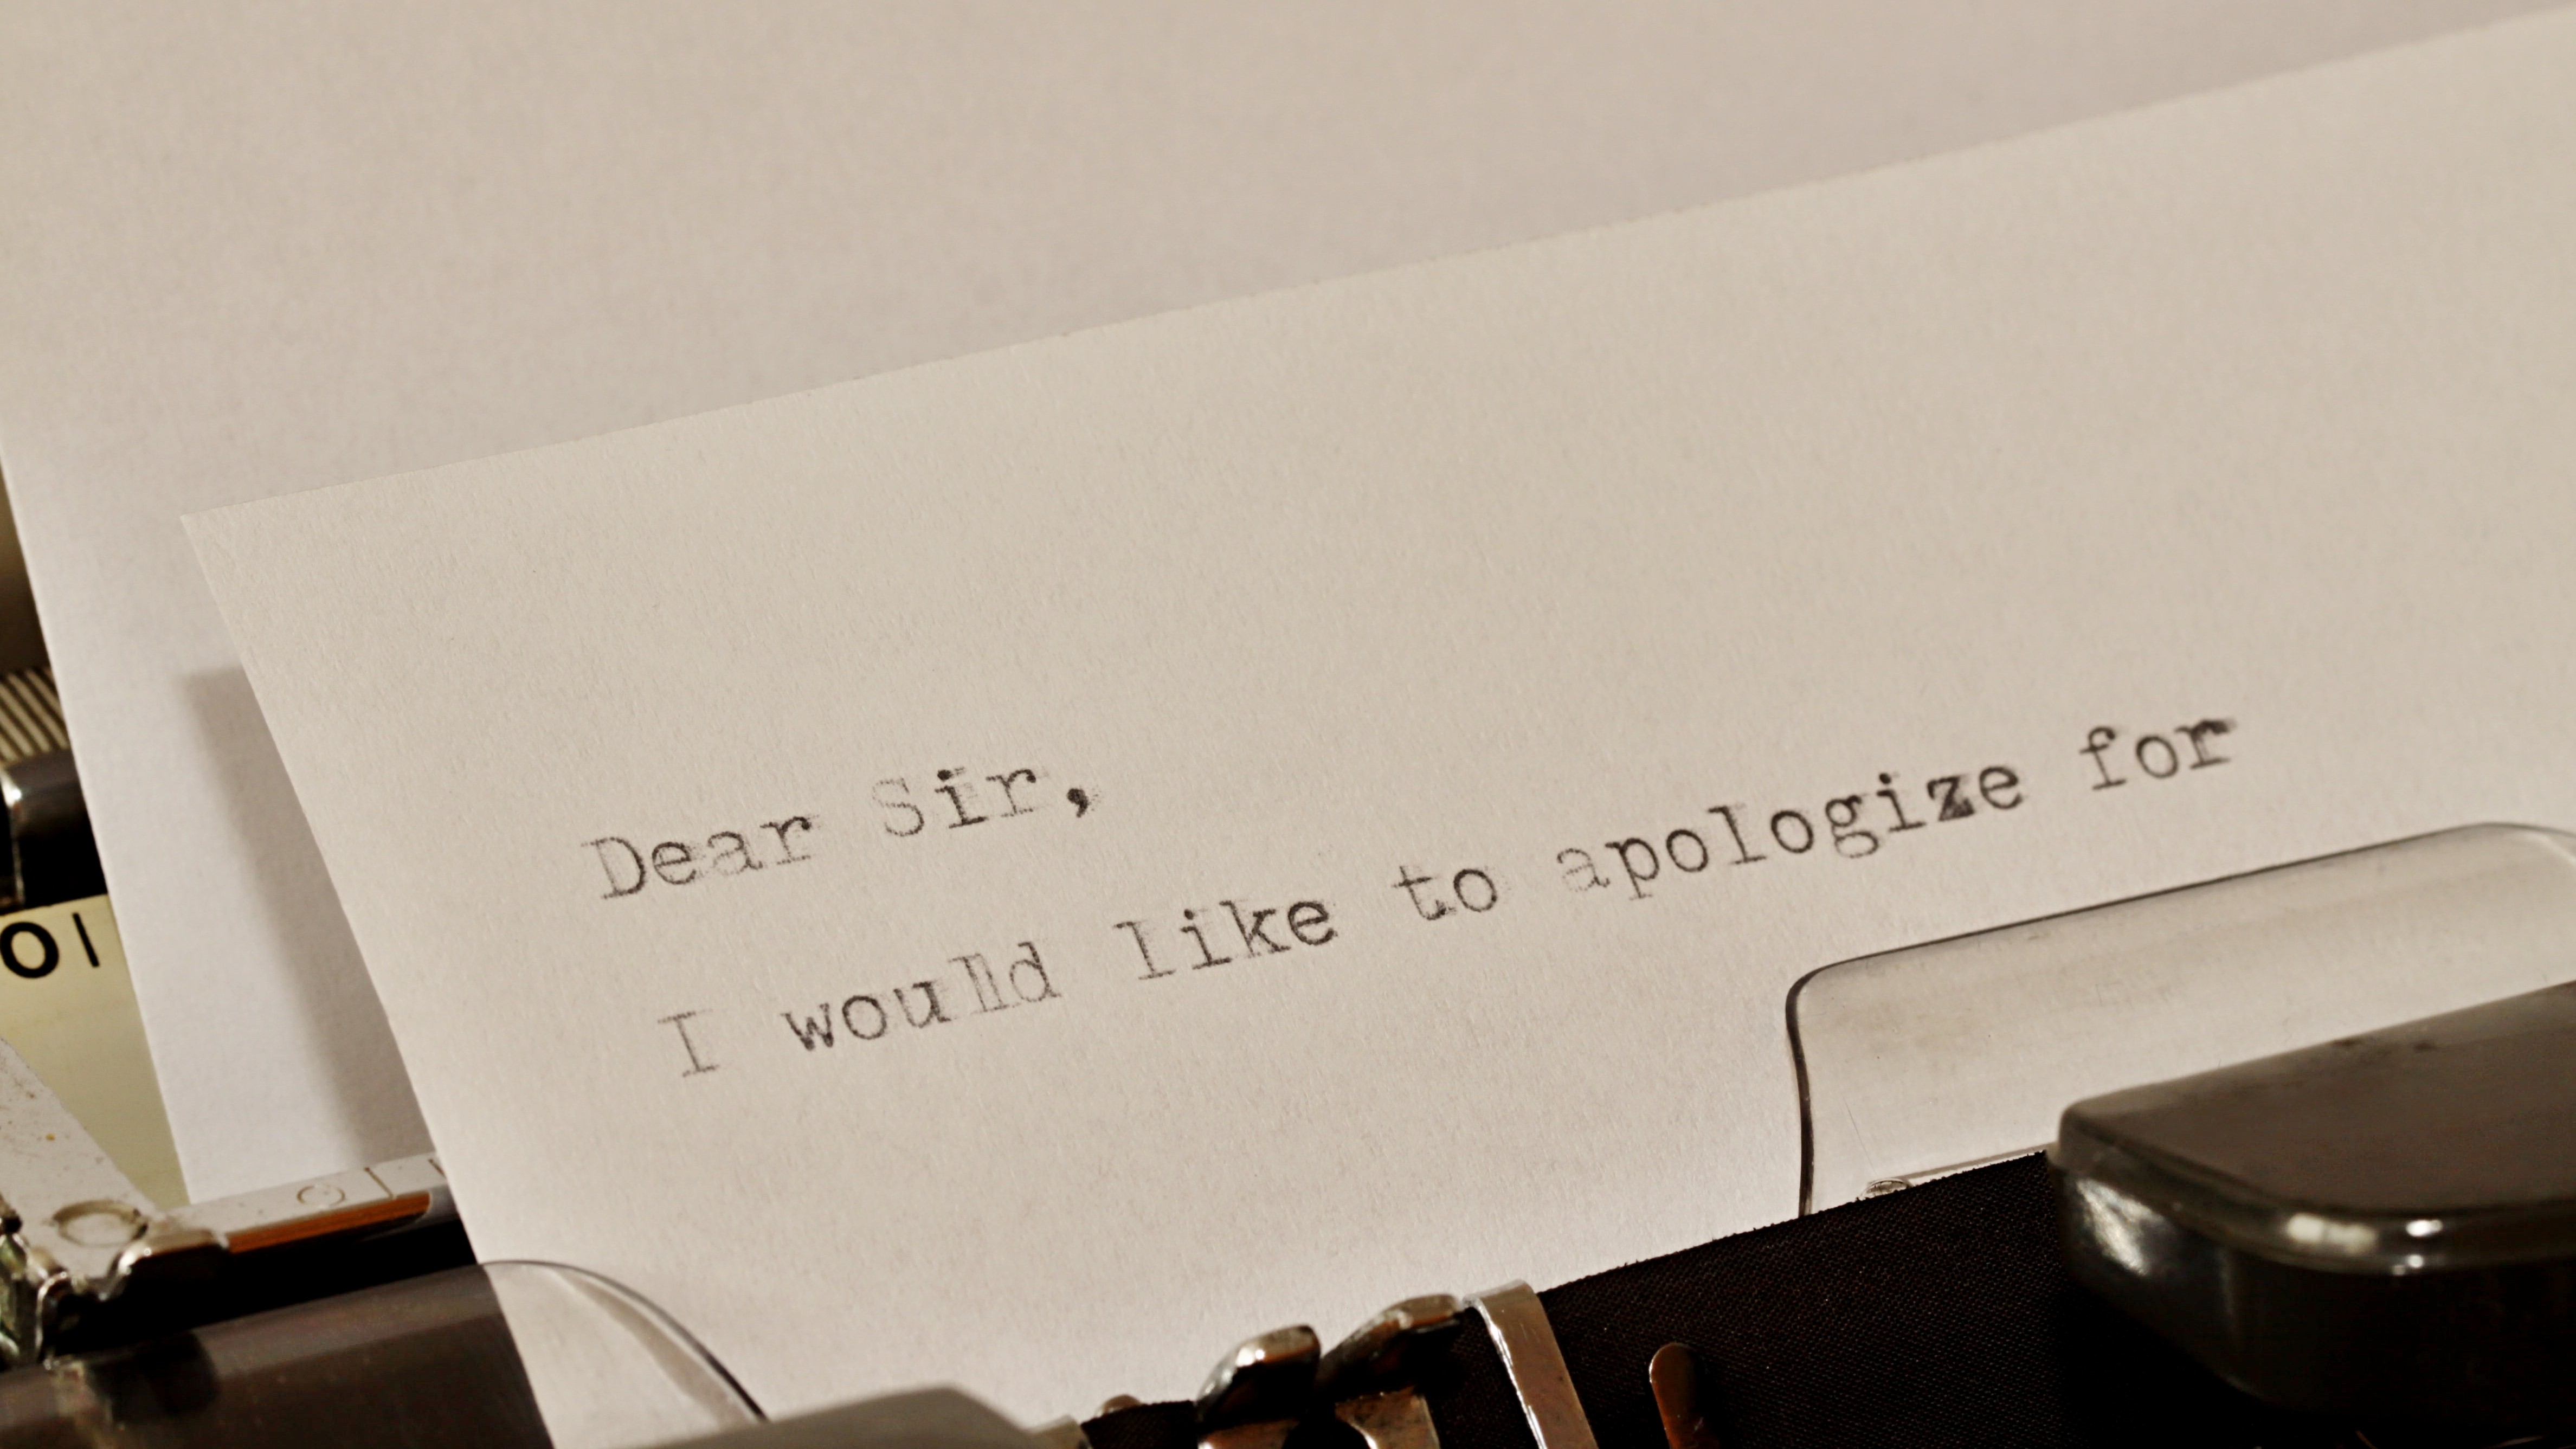 An apology letter being written on a typewriter | Source: Shutterstock